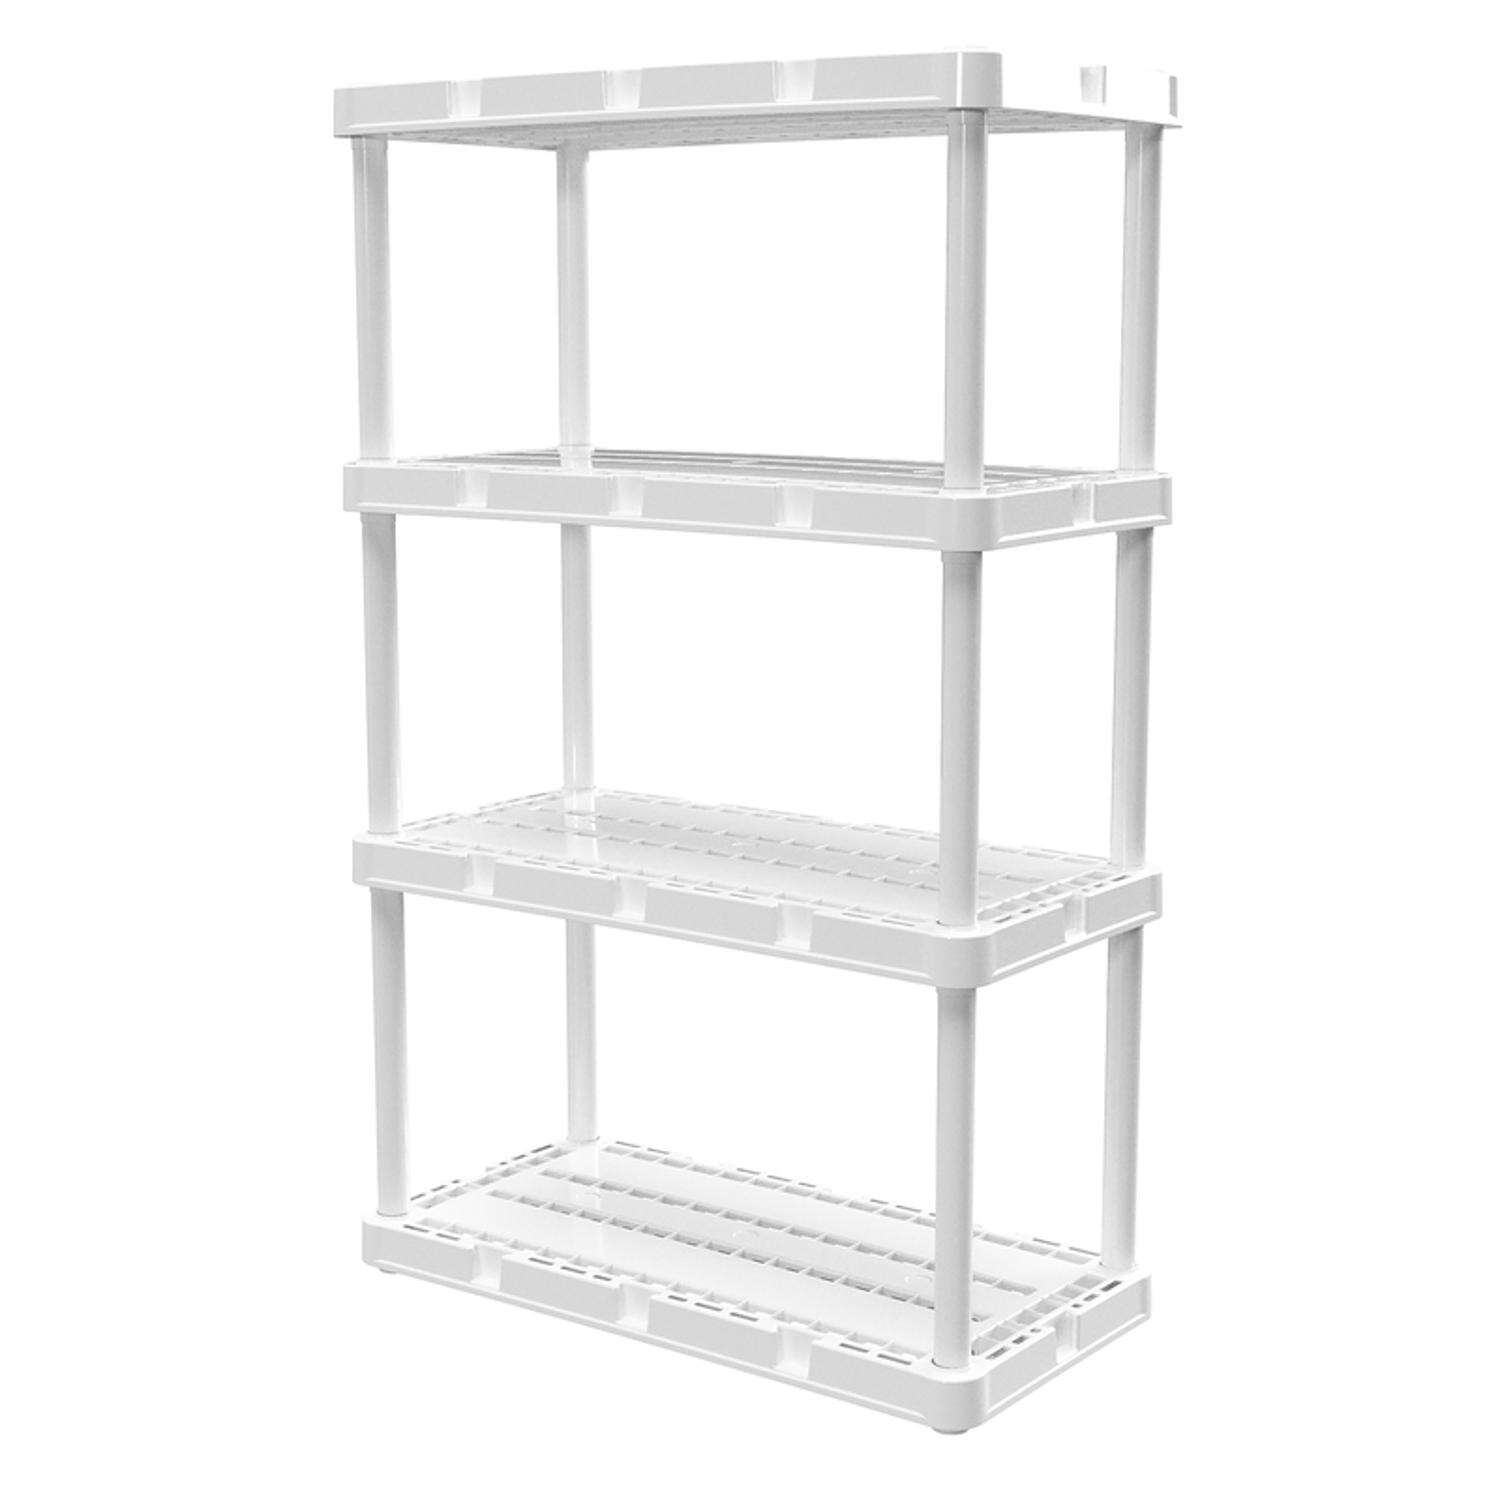 Gracious Living Knect-A-Shelf 48 in. H X 24 in. W X 12 in. D Resin Shelving Unit on Sale At VigLink Optimize Merchants